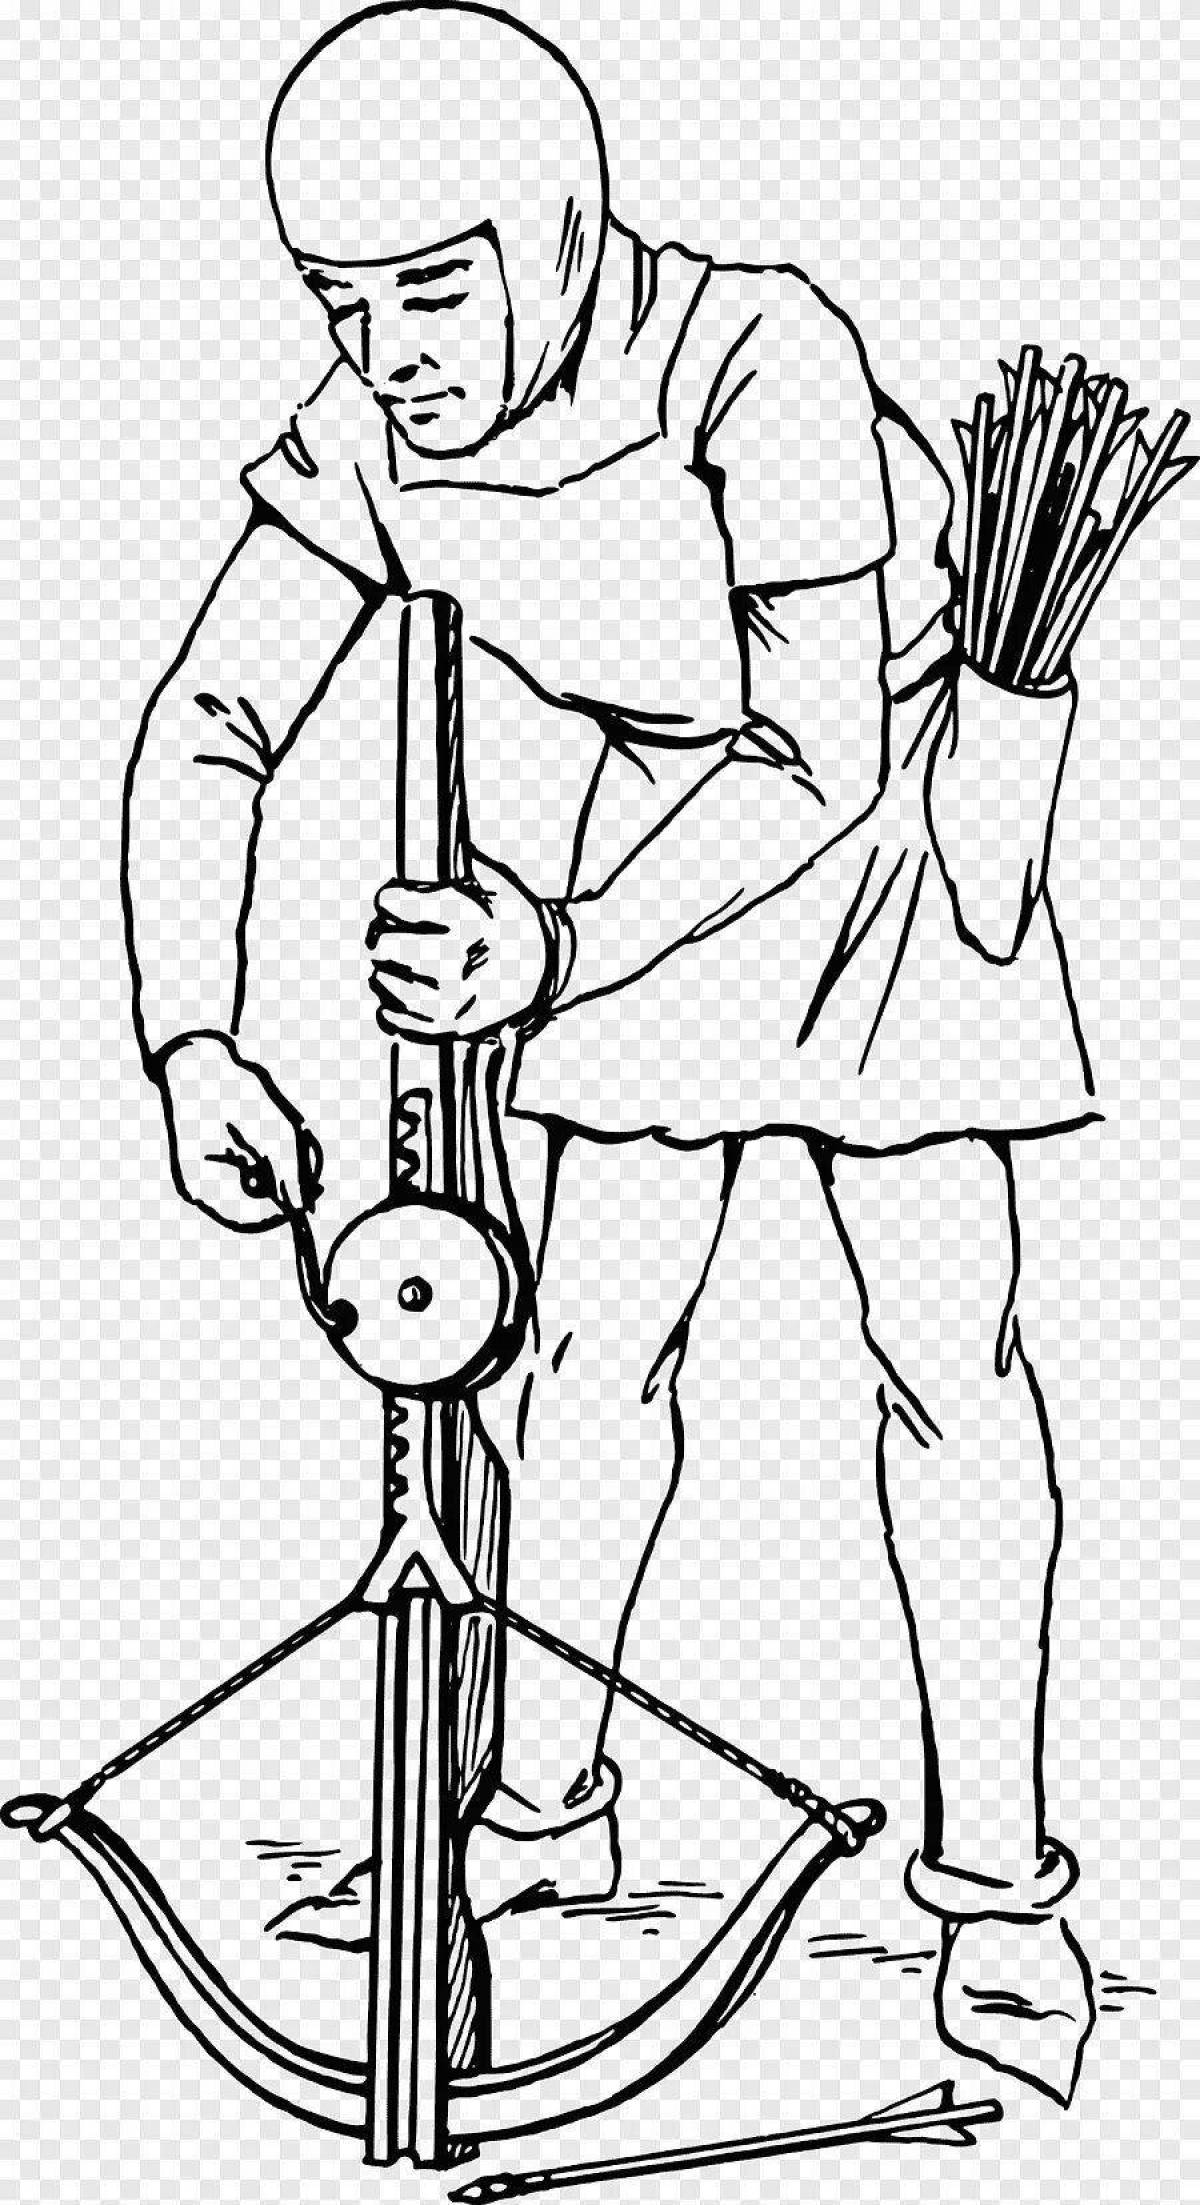 Amazing crossbow coloring page for kids